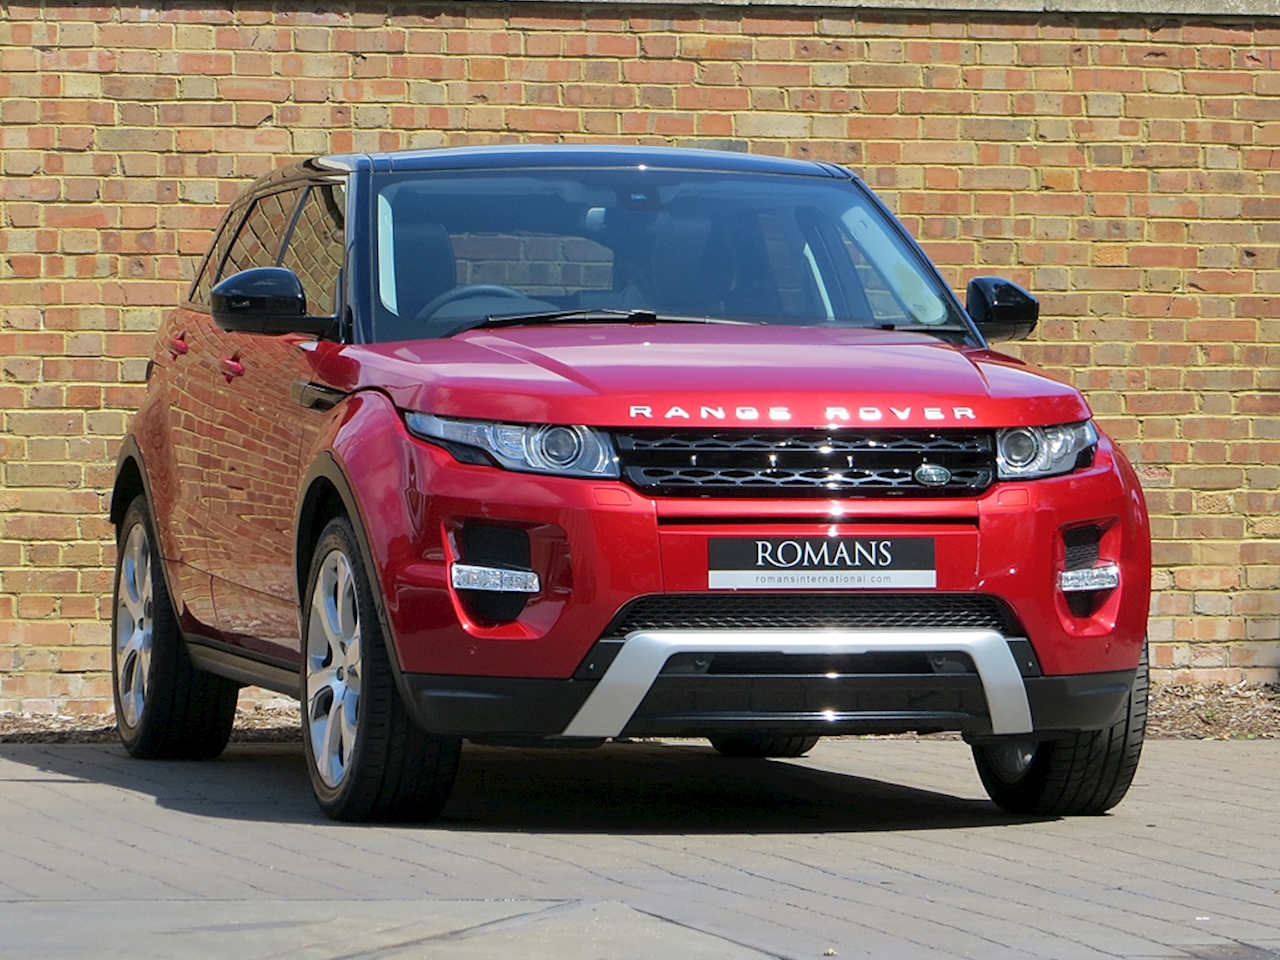 2014 Used Land Rover Range Rover Evoque 2.2 SD4 Dynamic Lux | Firenze Red